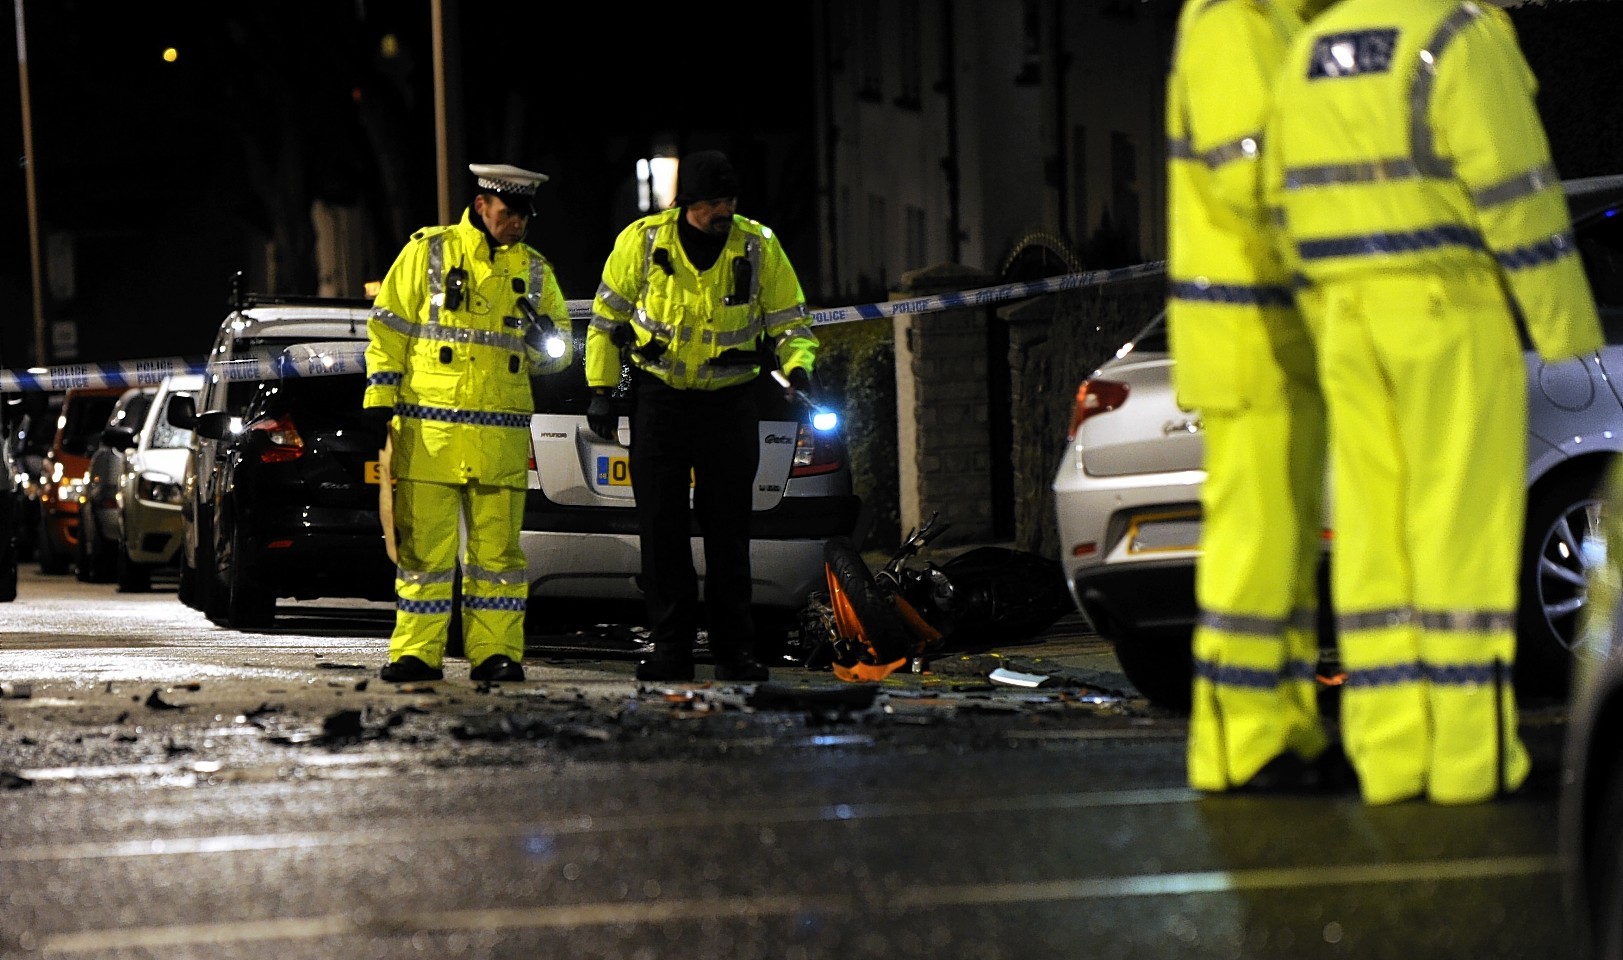 Police at the scene of the crash on Hilton Drive, Aberdeen